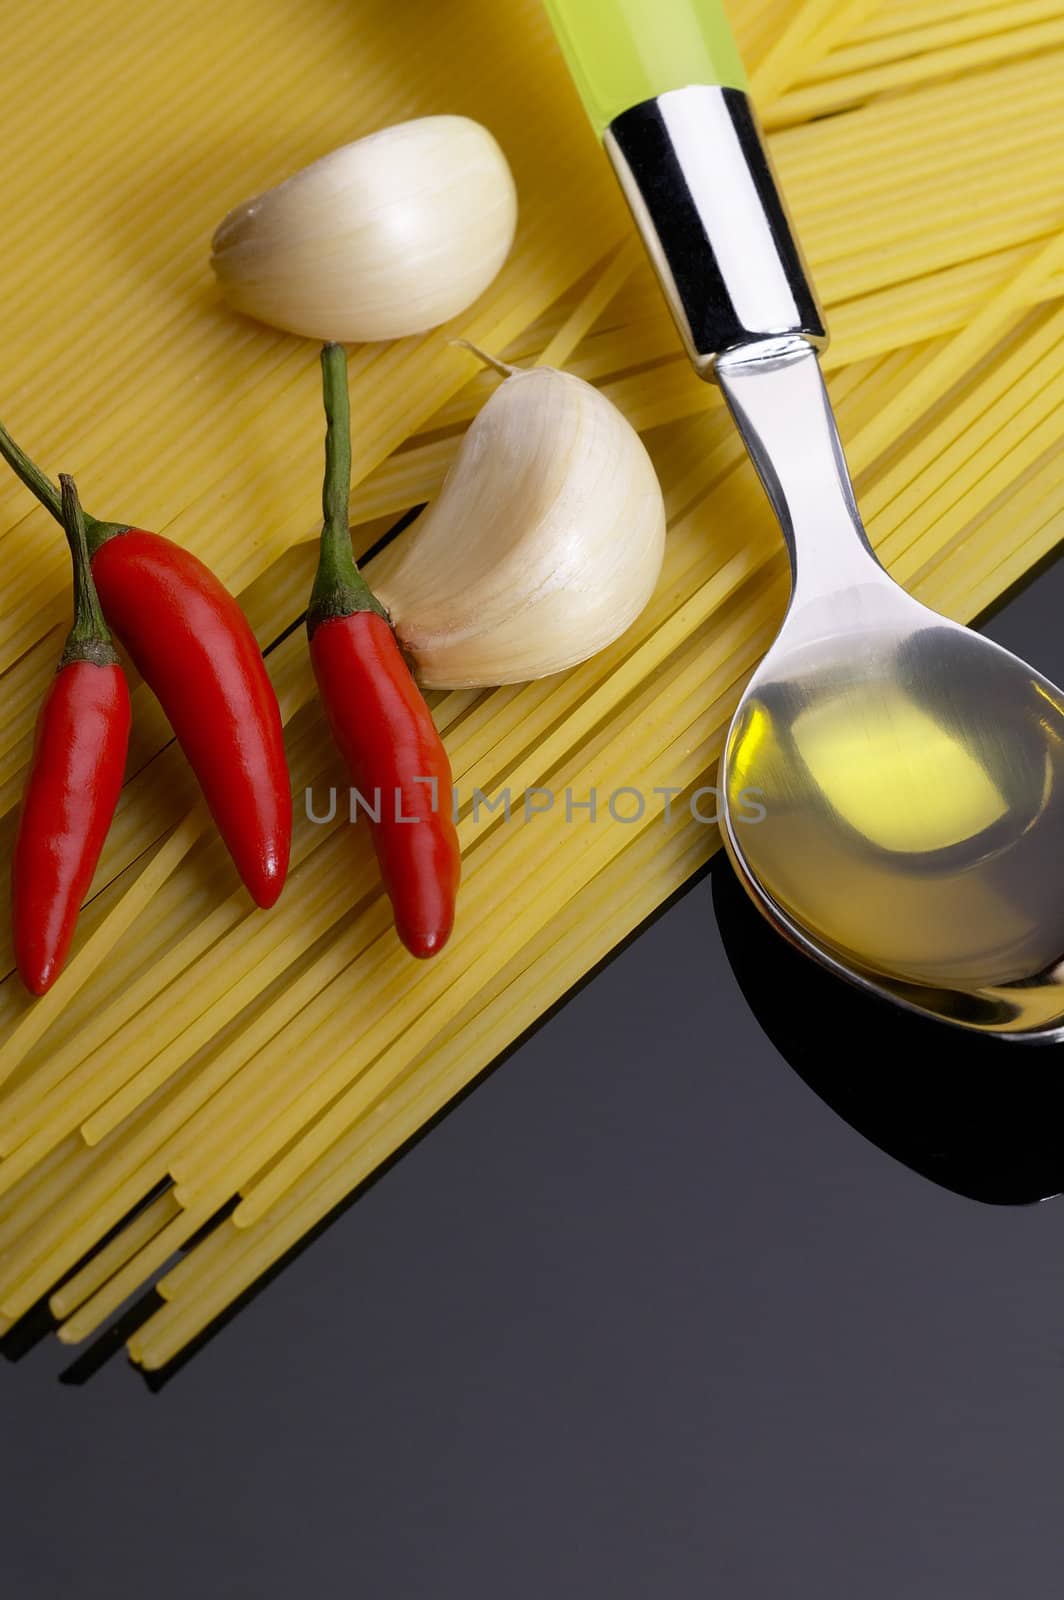 pasta garlic olive oil and red chili pepper ove black reflective surface